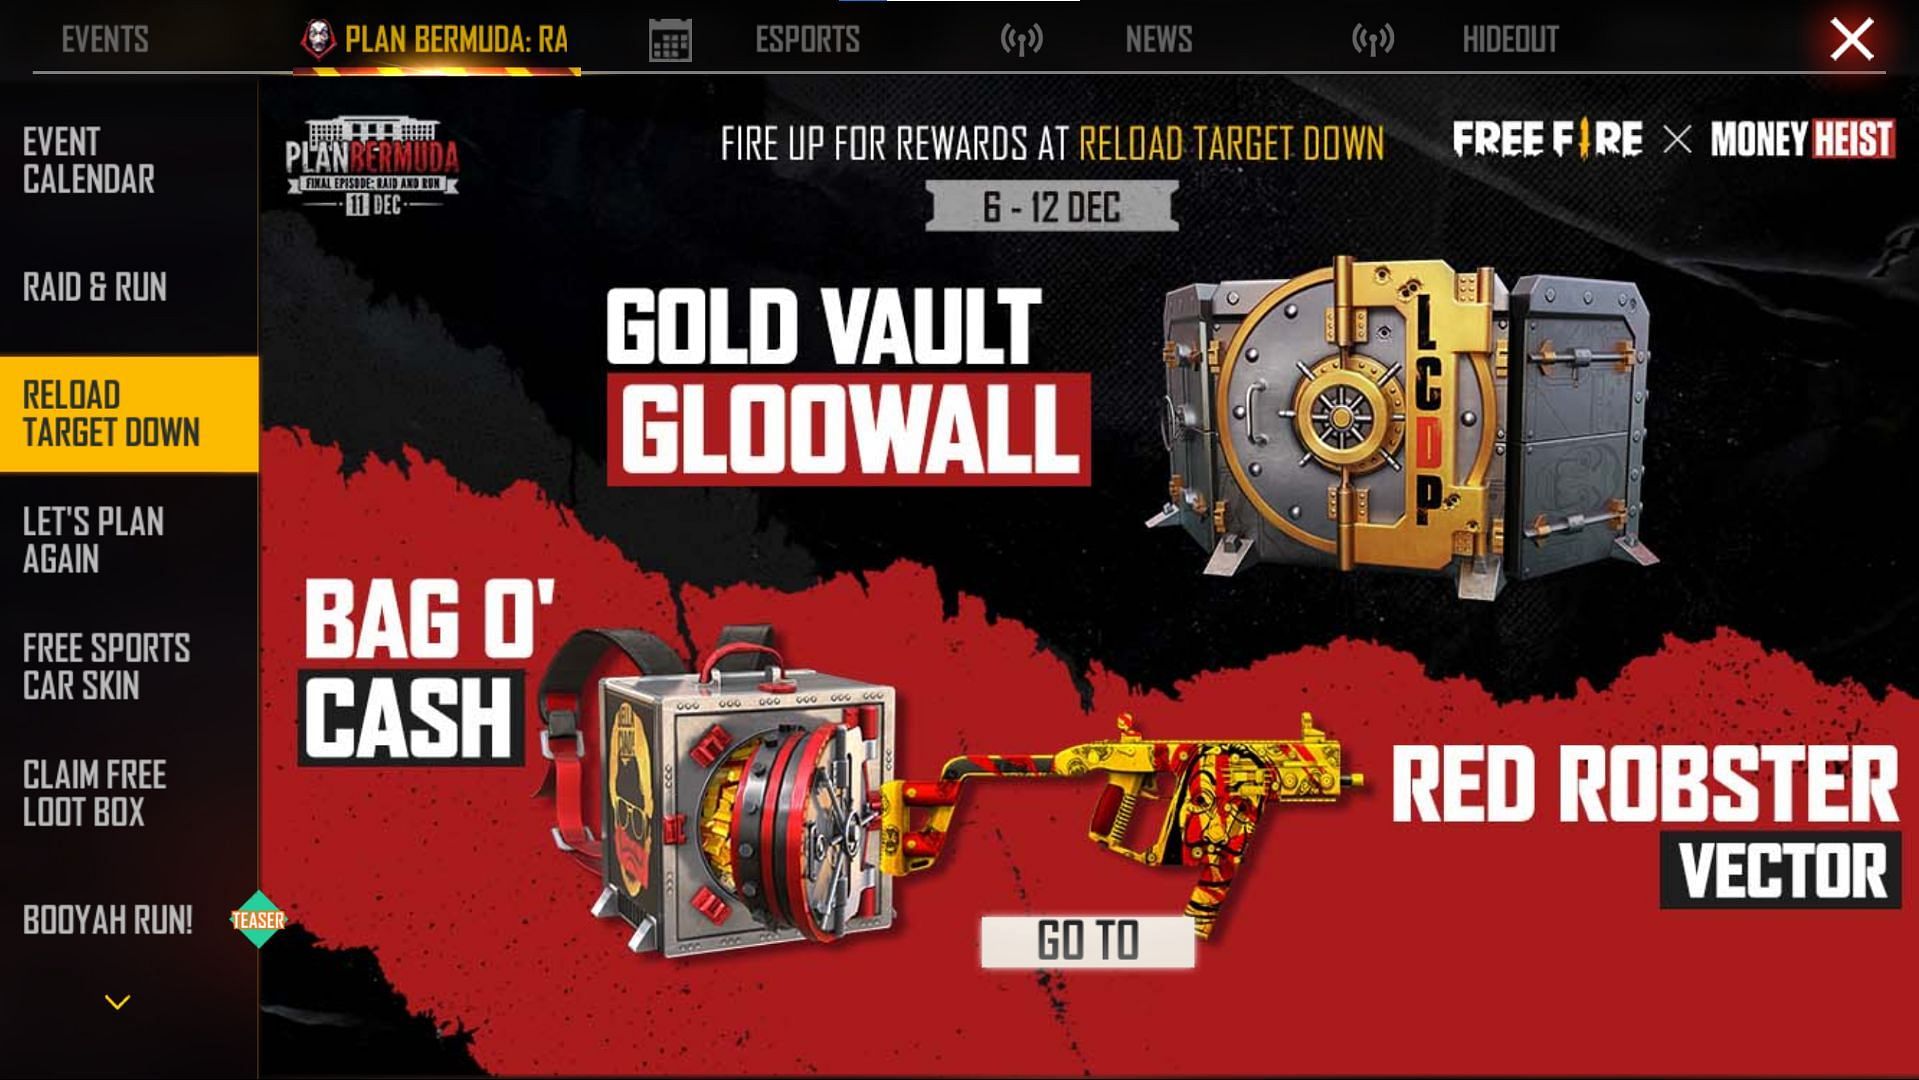 Diamonds can be spent on events (Image via Free Fire)